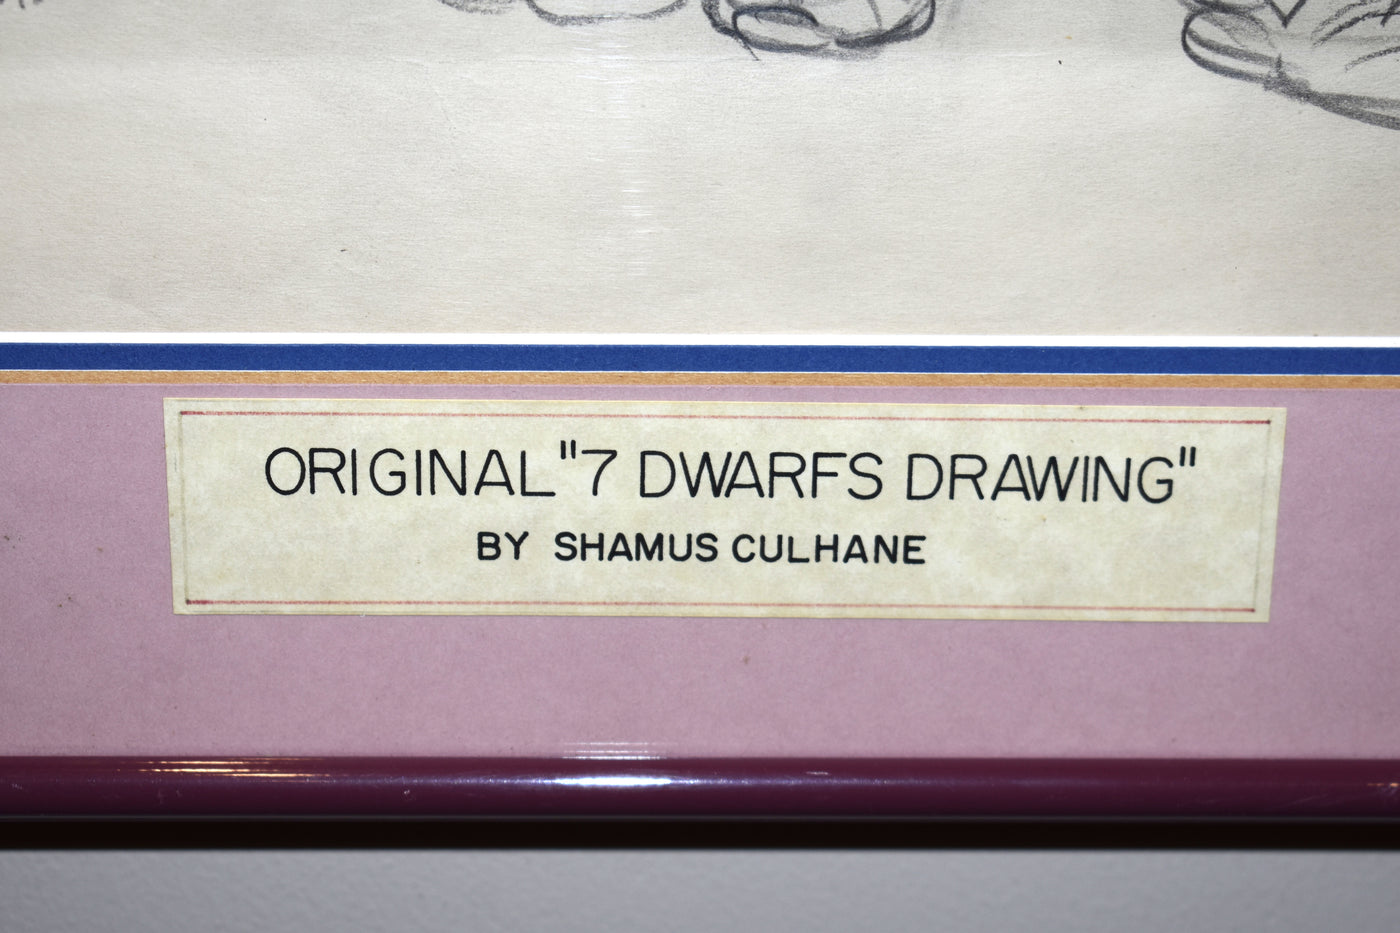 Original Walt Disney Production Drawing from Snow White and the Seven Dwarfs Featuring the Seven Dwarfs, Signed by Shamus Culhane